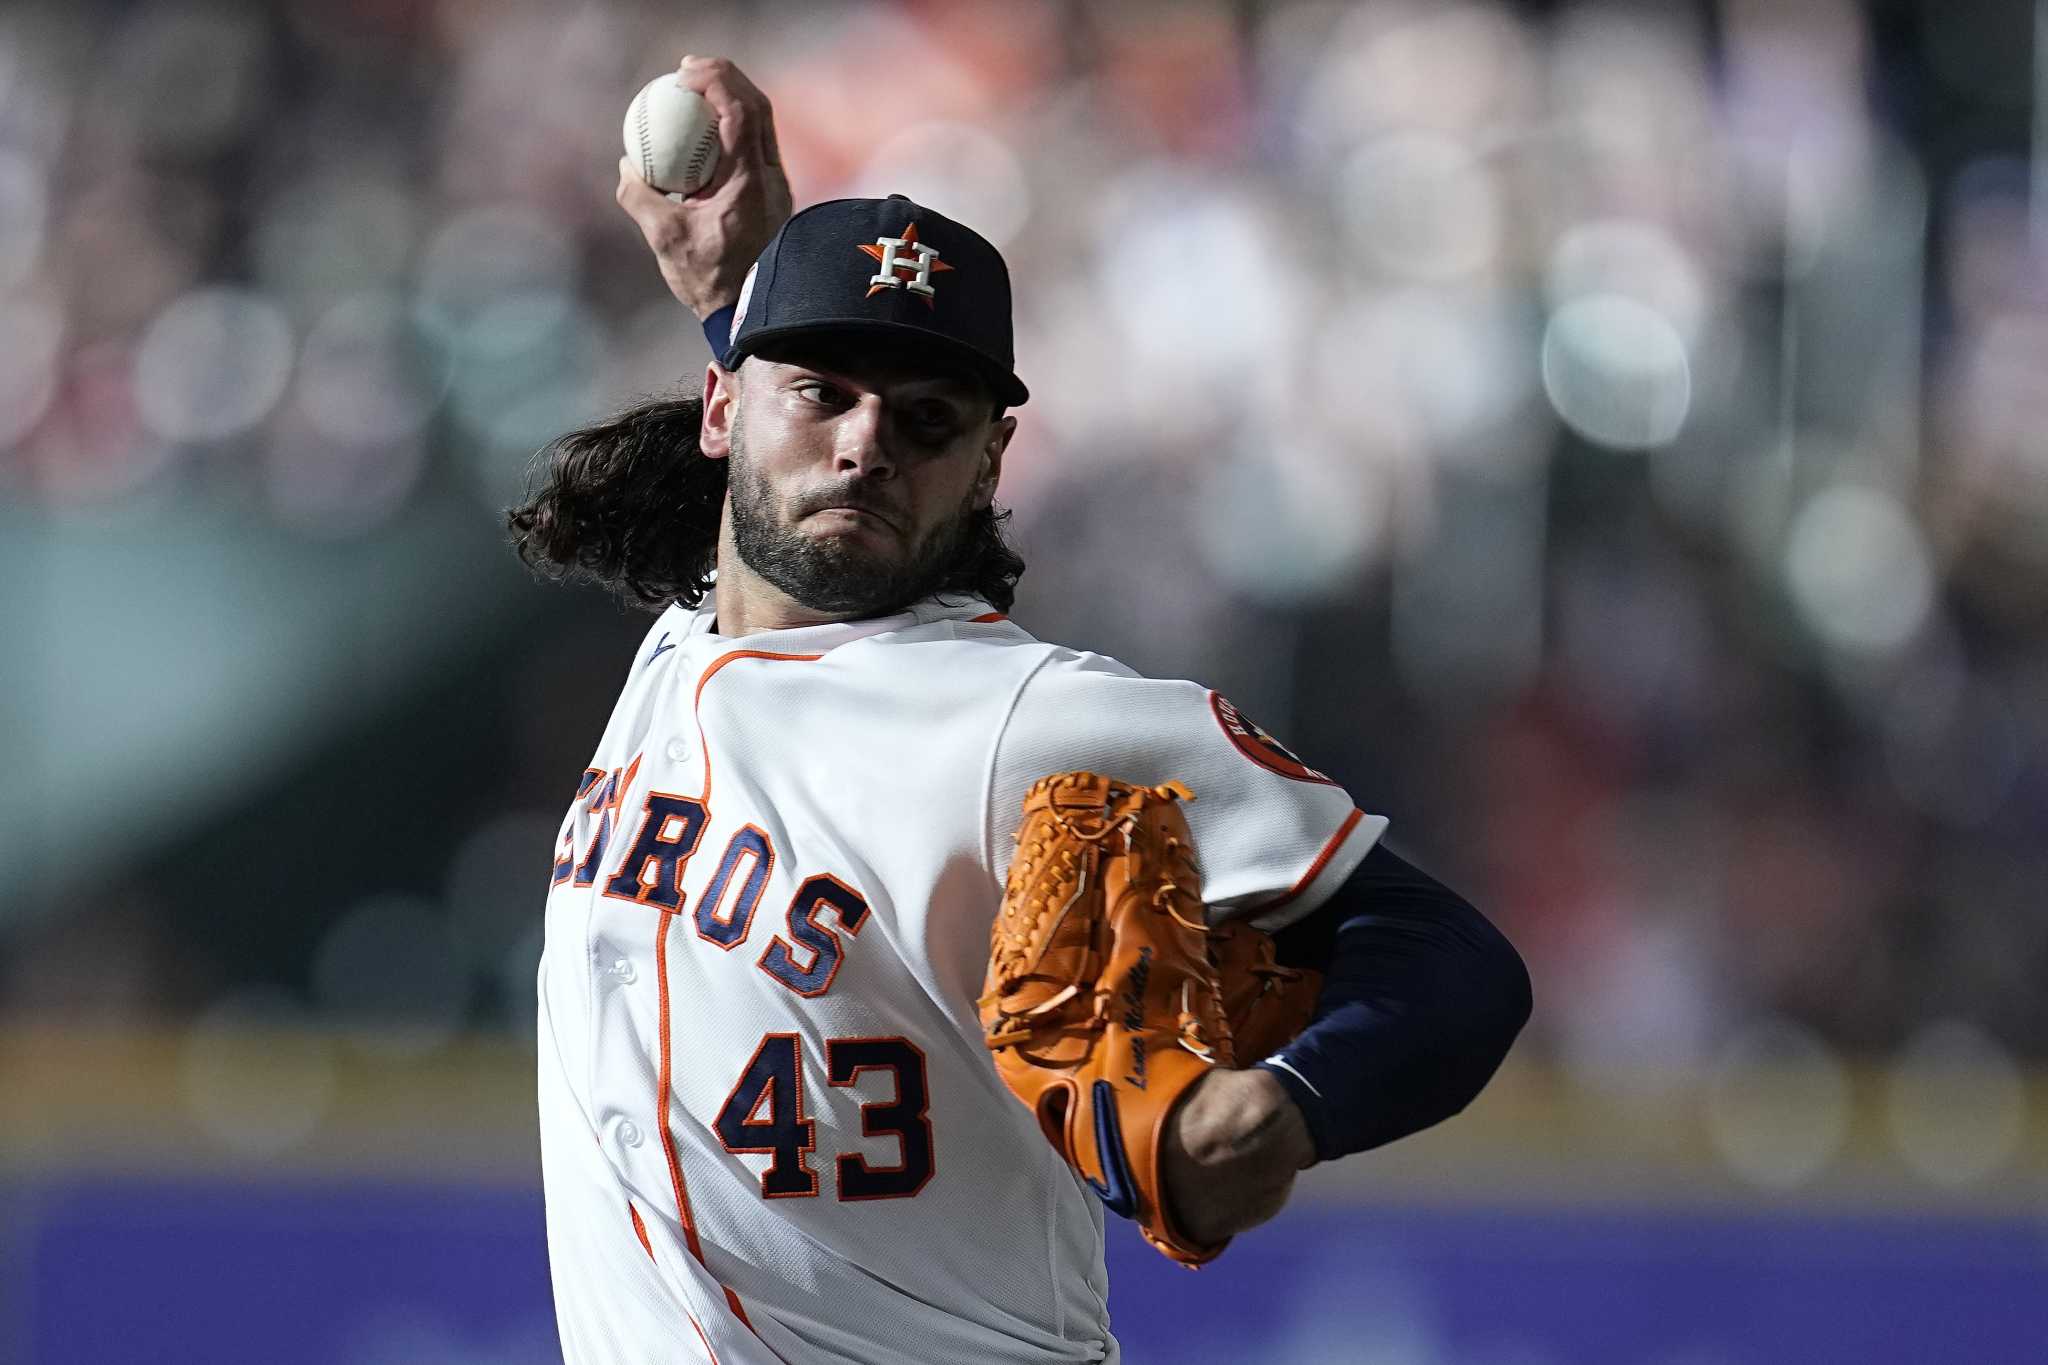 Chas McCormick's Astros story: so close … and now close again